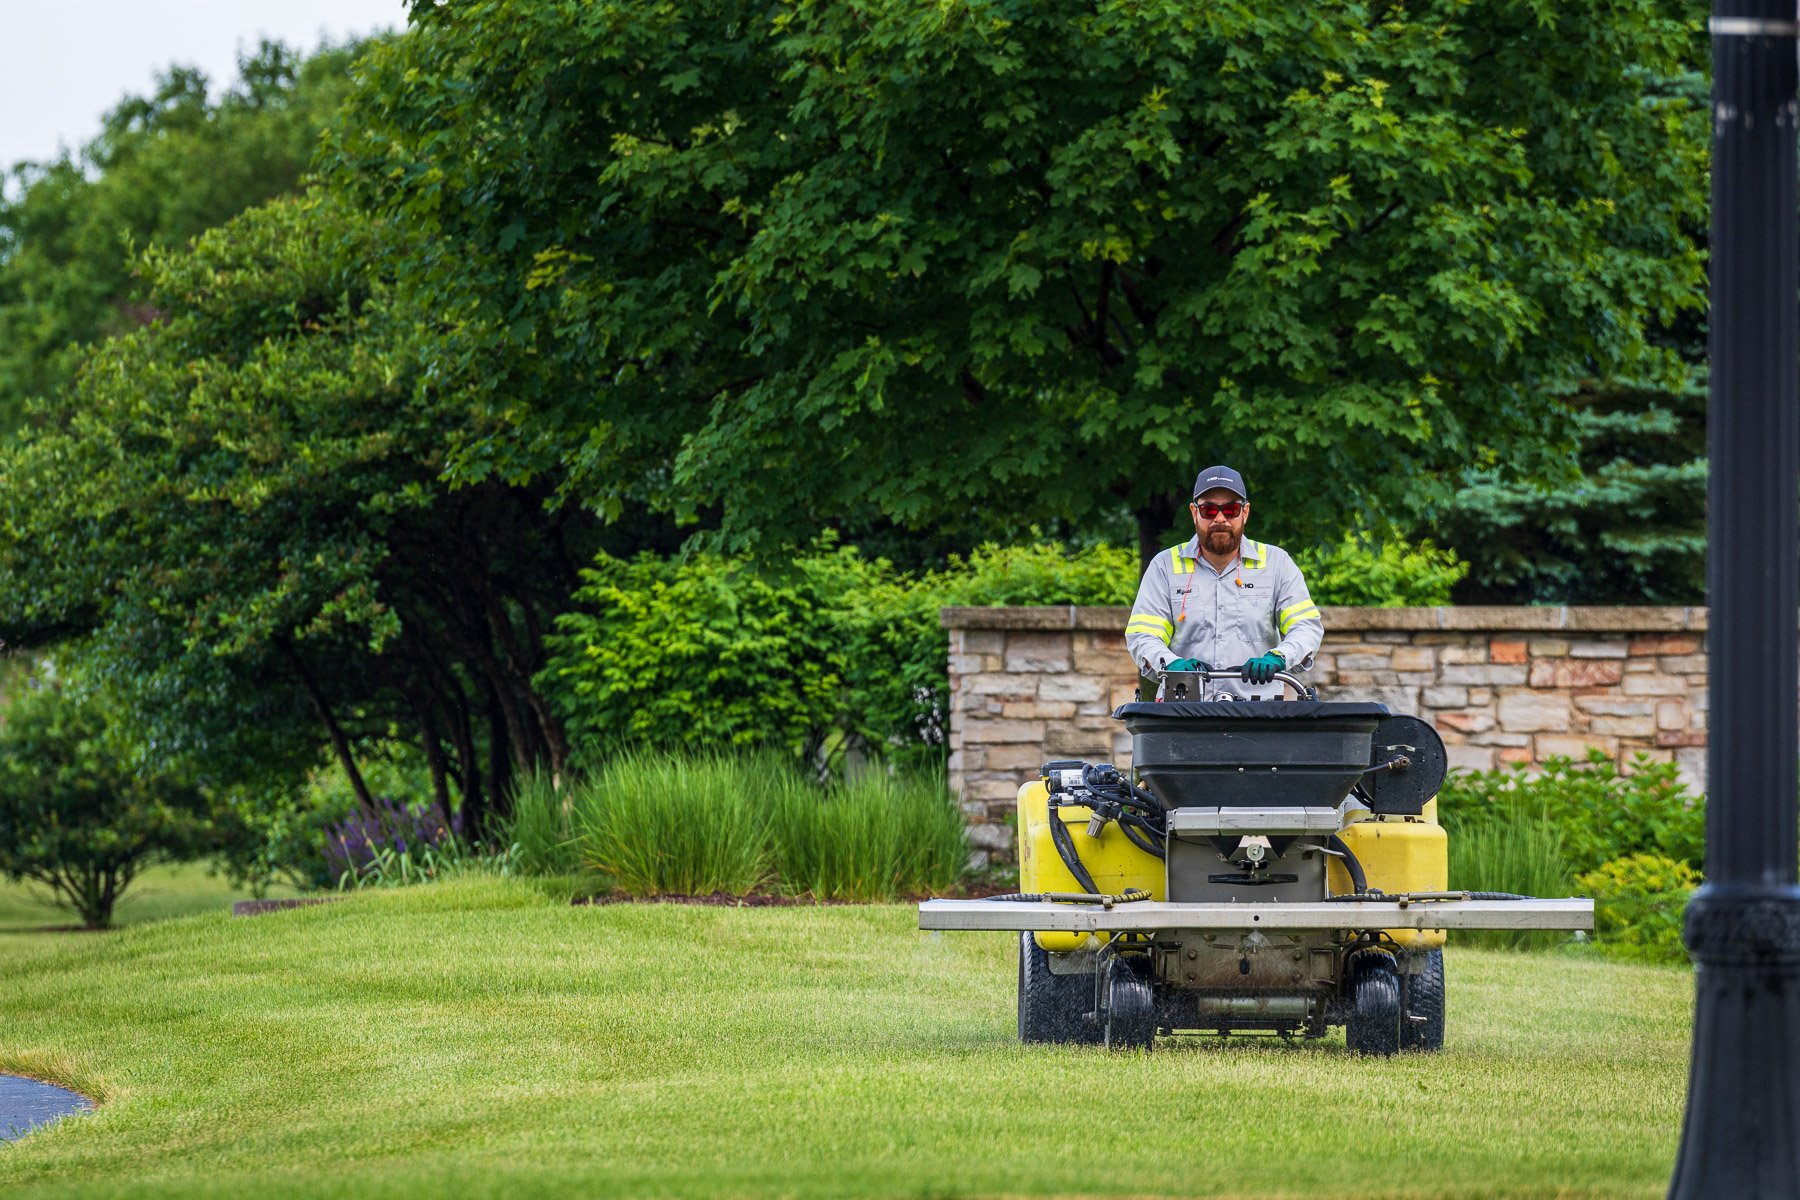 commercial lawn care technician spraying a lawn with liquid fertilizer